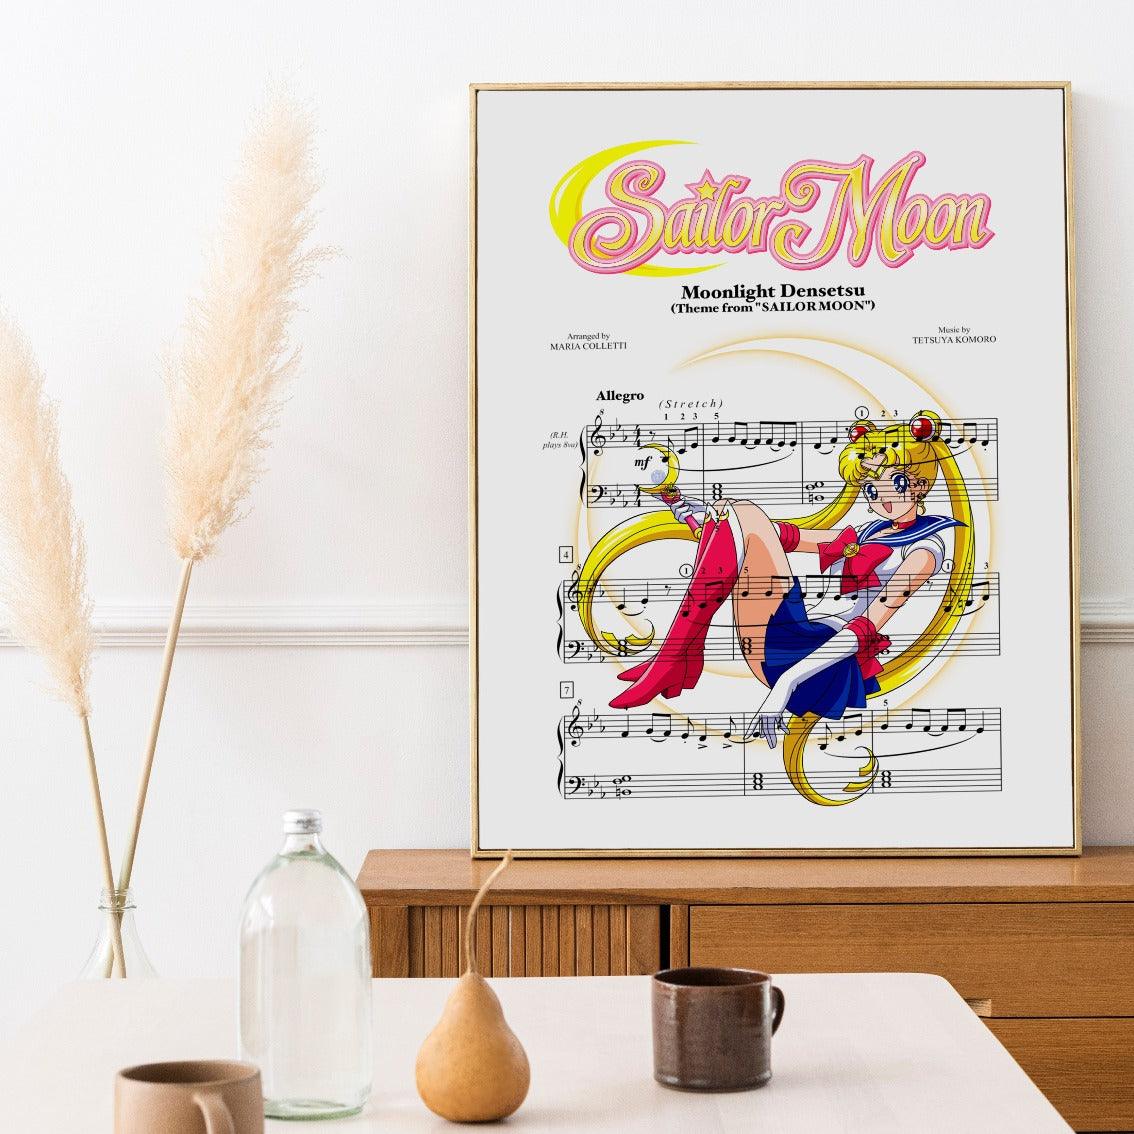 Take a journey through the power of music with this marvelous poster featuring the main theme of Sailor Moon. Represent the beauty of song lyrics in art and bask in the warmth of nostalgia as you reminiscence upon classics. Now you can make any song your own with this holiday gift idea. From framed lyric prints to wall art and anything in between, it makes a great addition to your home while capturing some of life's most cherished moments. Get creative and customize your own poster today!